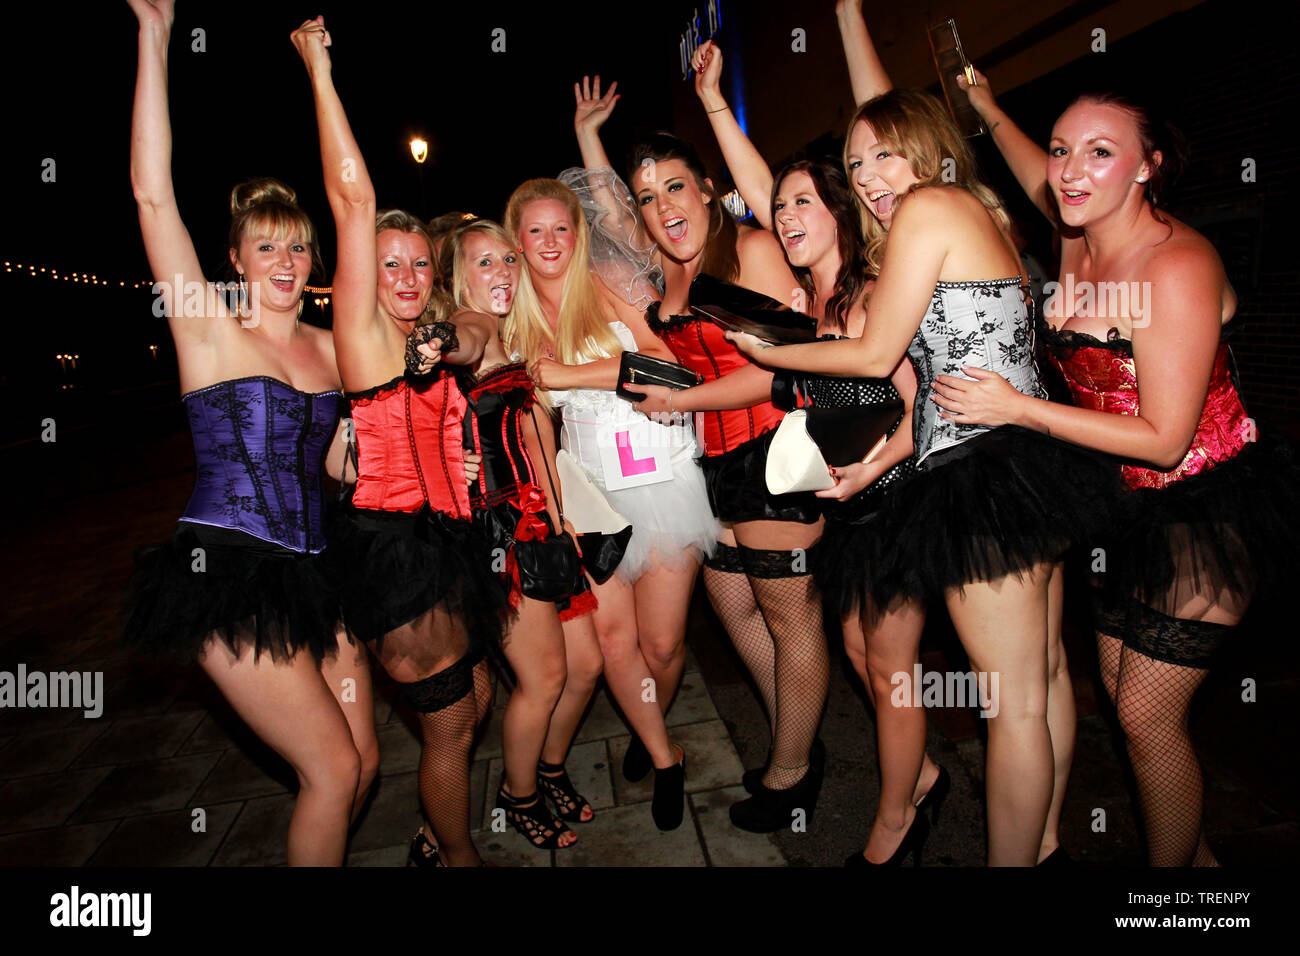 Lady/'s Girl/'s Over The Knee Socks Orange and Black Fancy Dress Hen Night Party